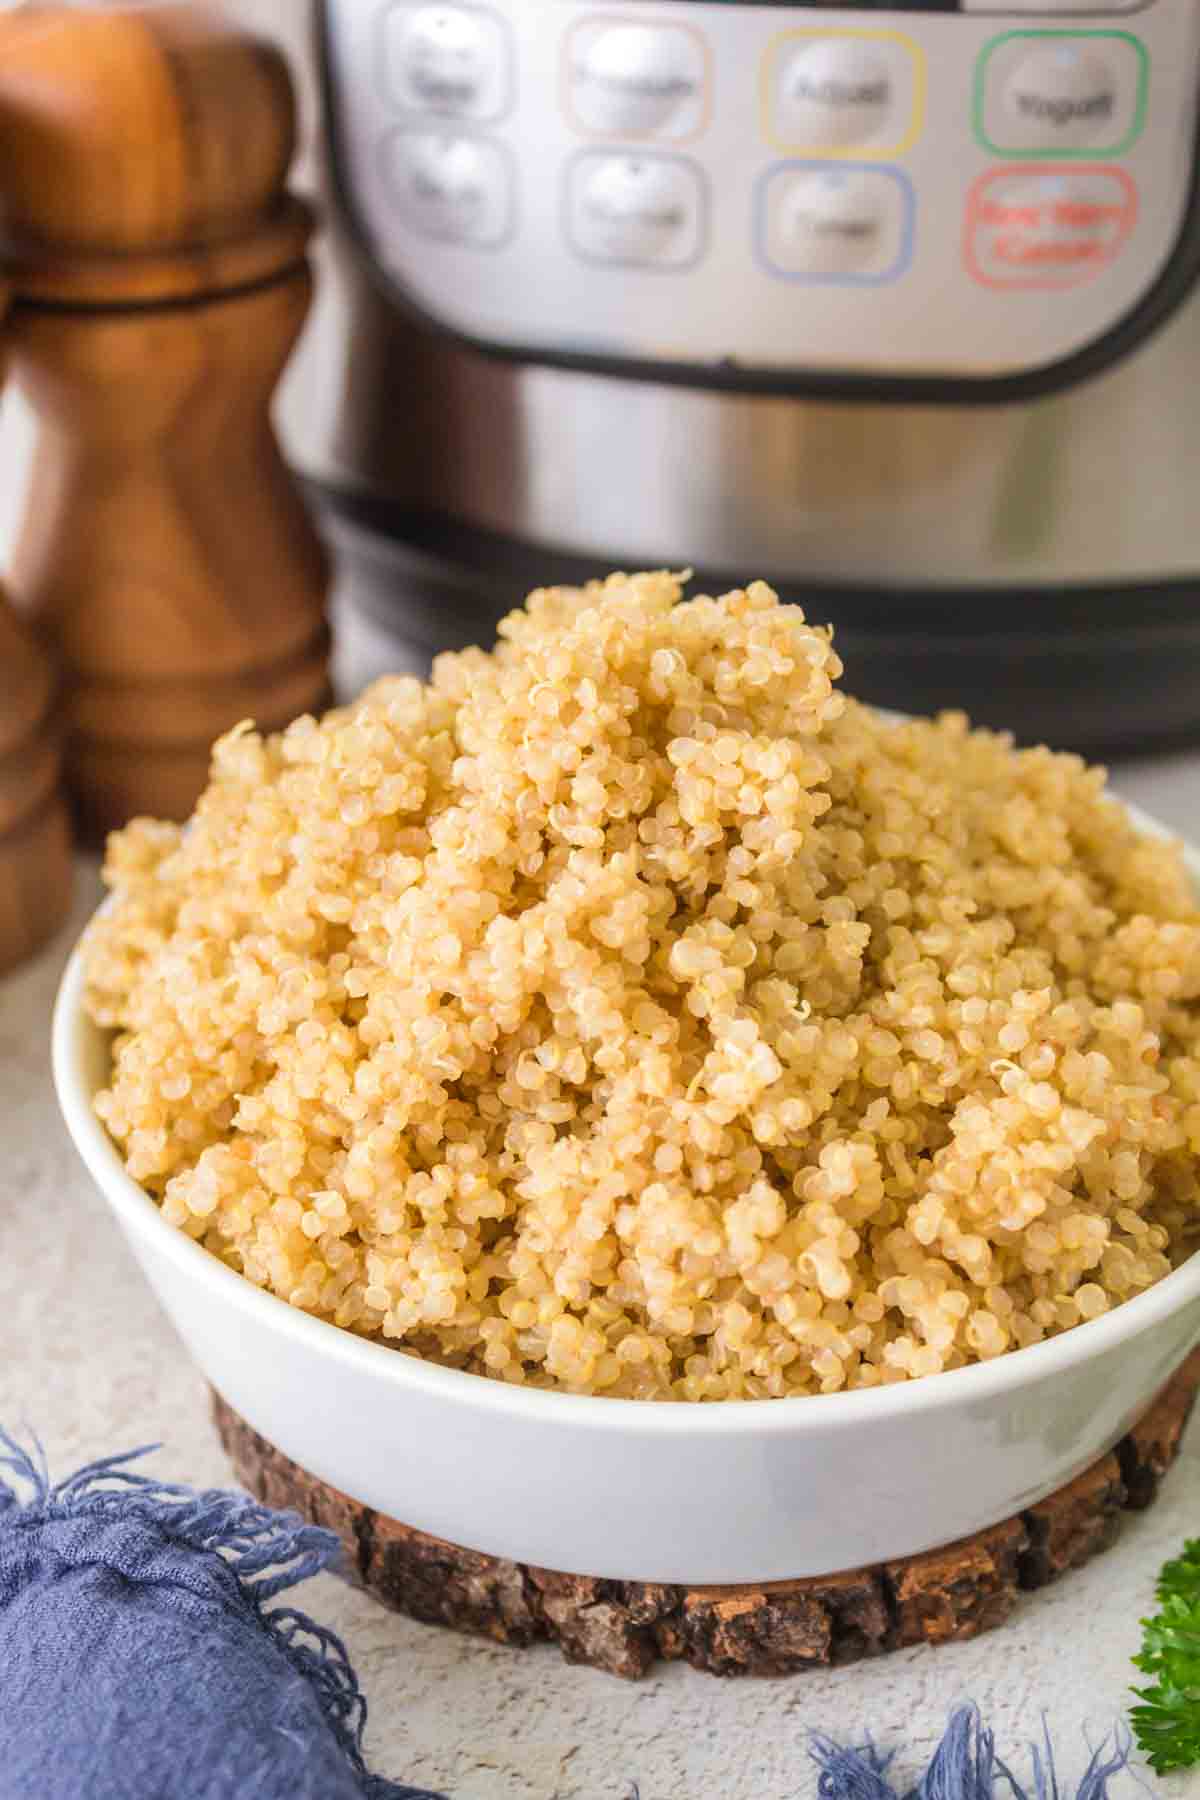 Bowl on quinoa made with an Instant Pot.